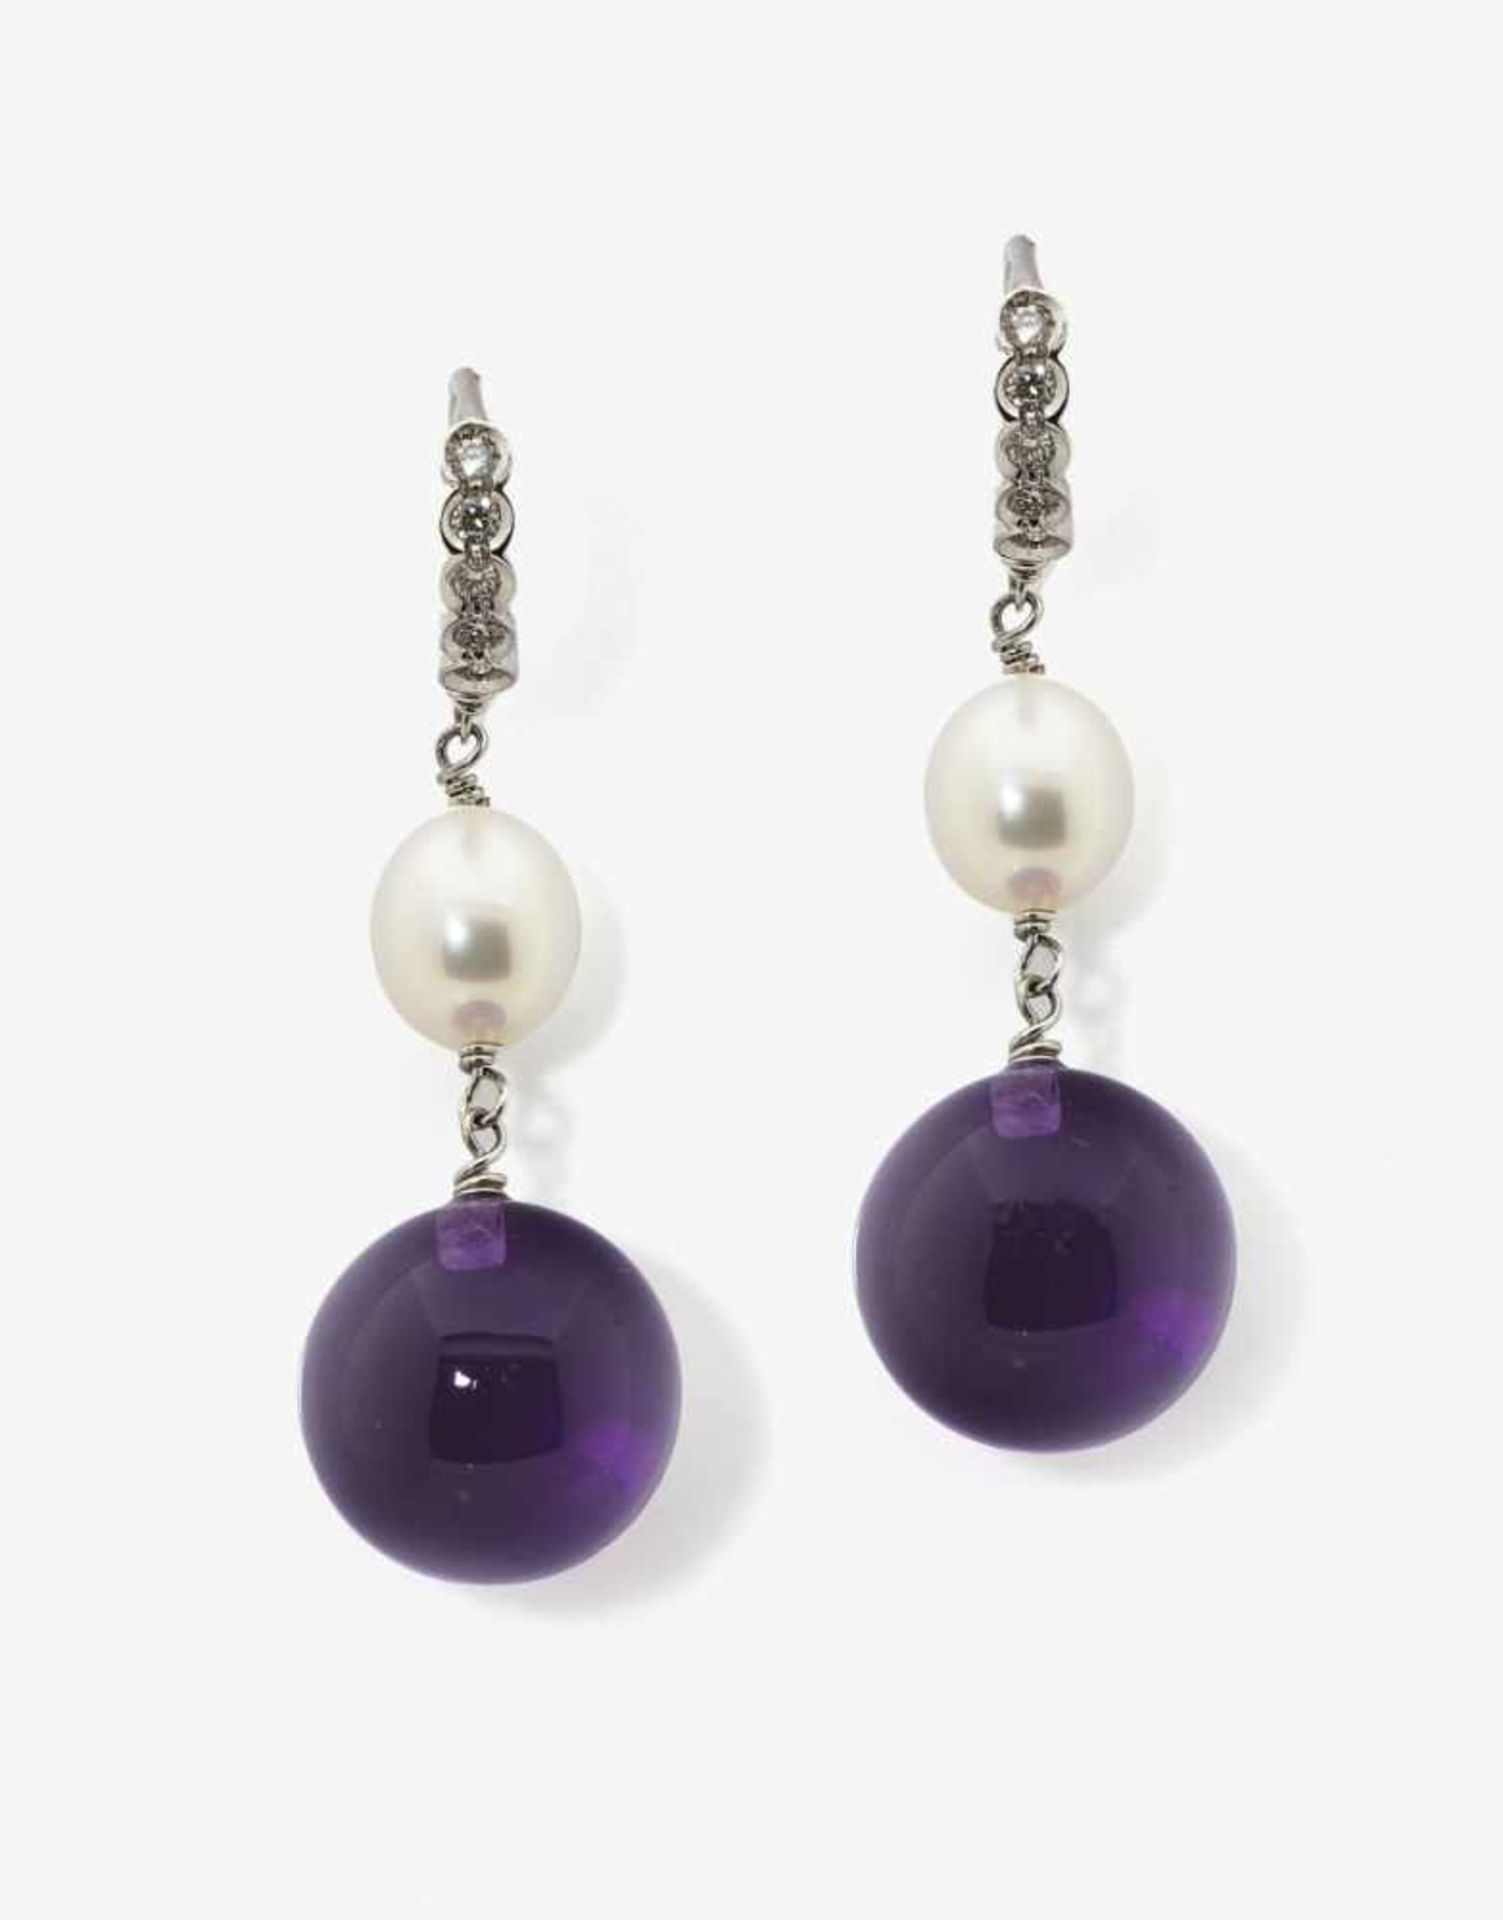 A Pair of Amethyst, Cultured Pearl and Diamond Earrings18K white gold (750/-), stamped. 10 small,